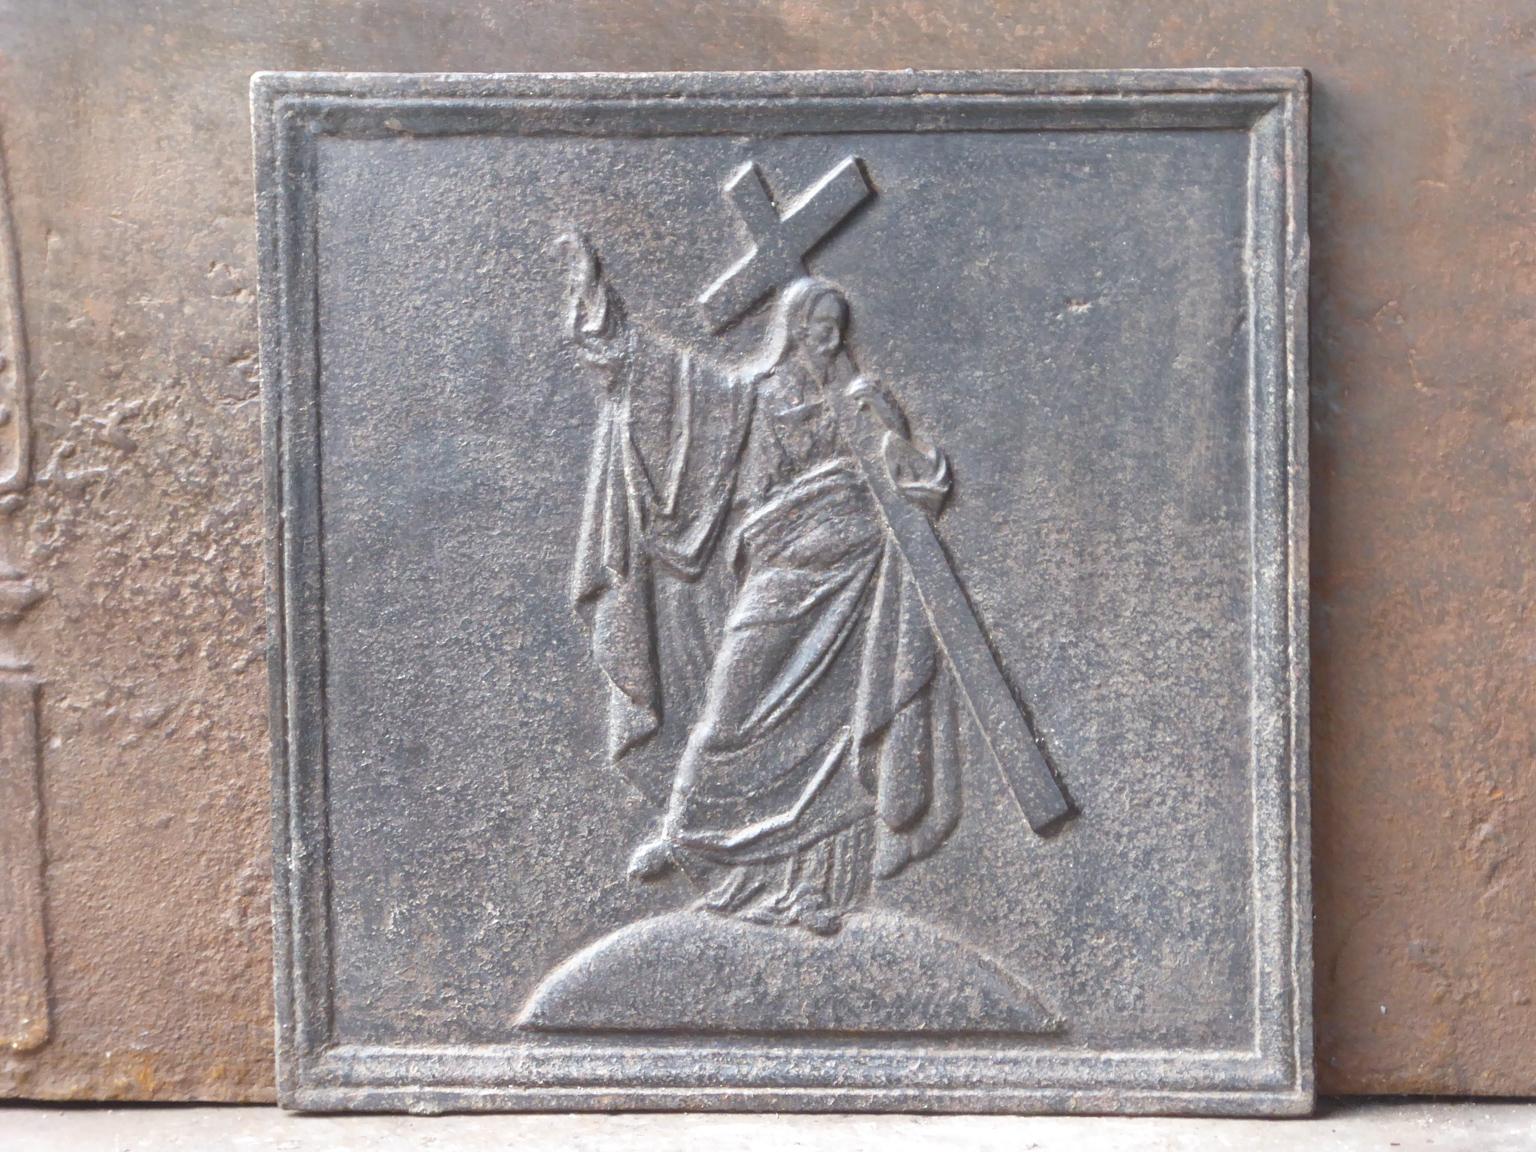 19th century French Napoleon III fireback with Jesus. The fireback is made of cast iron and has black / pewter patina. It is in a good condition and does not have cracks.